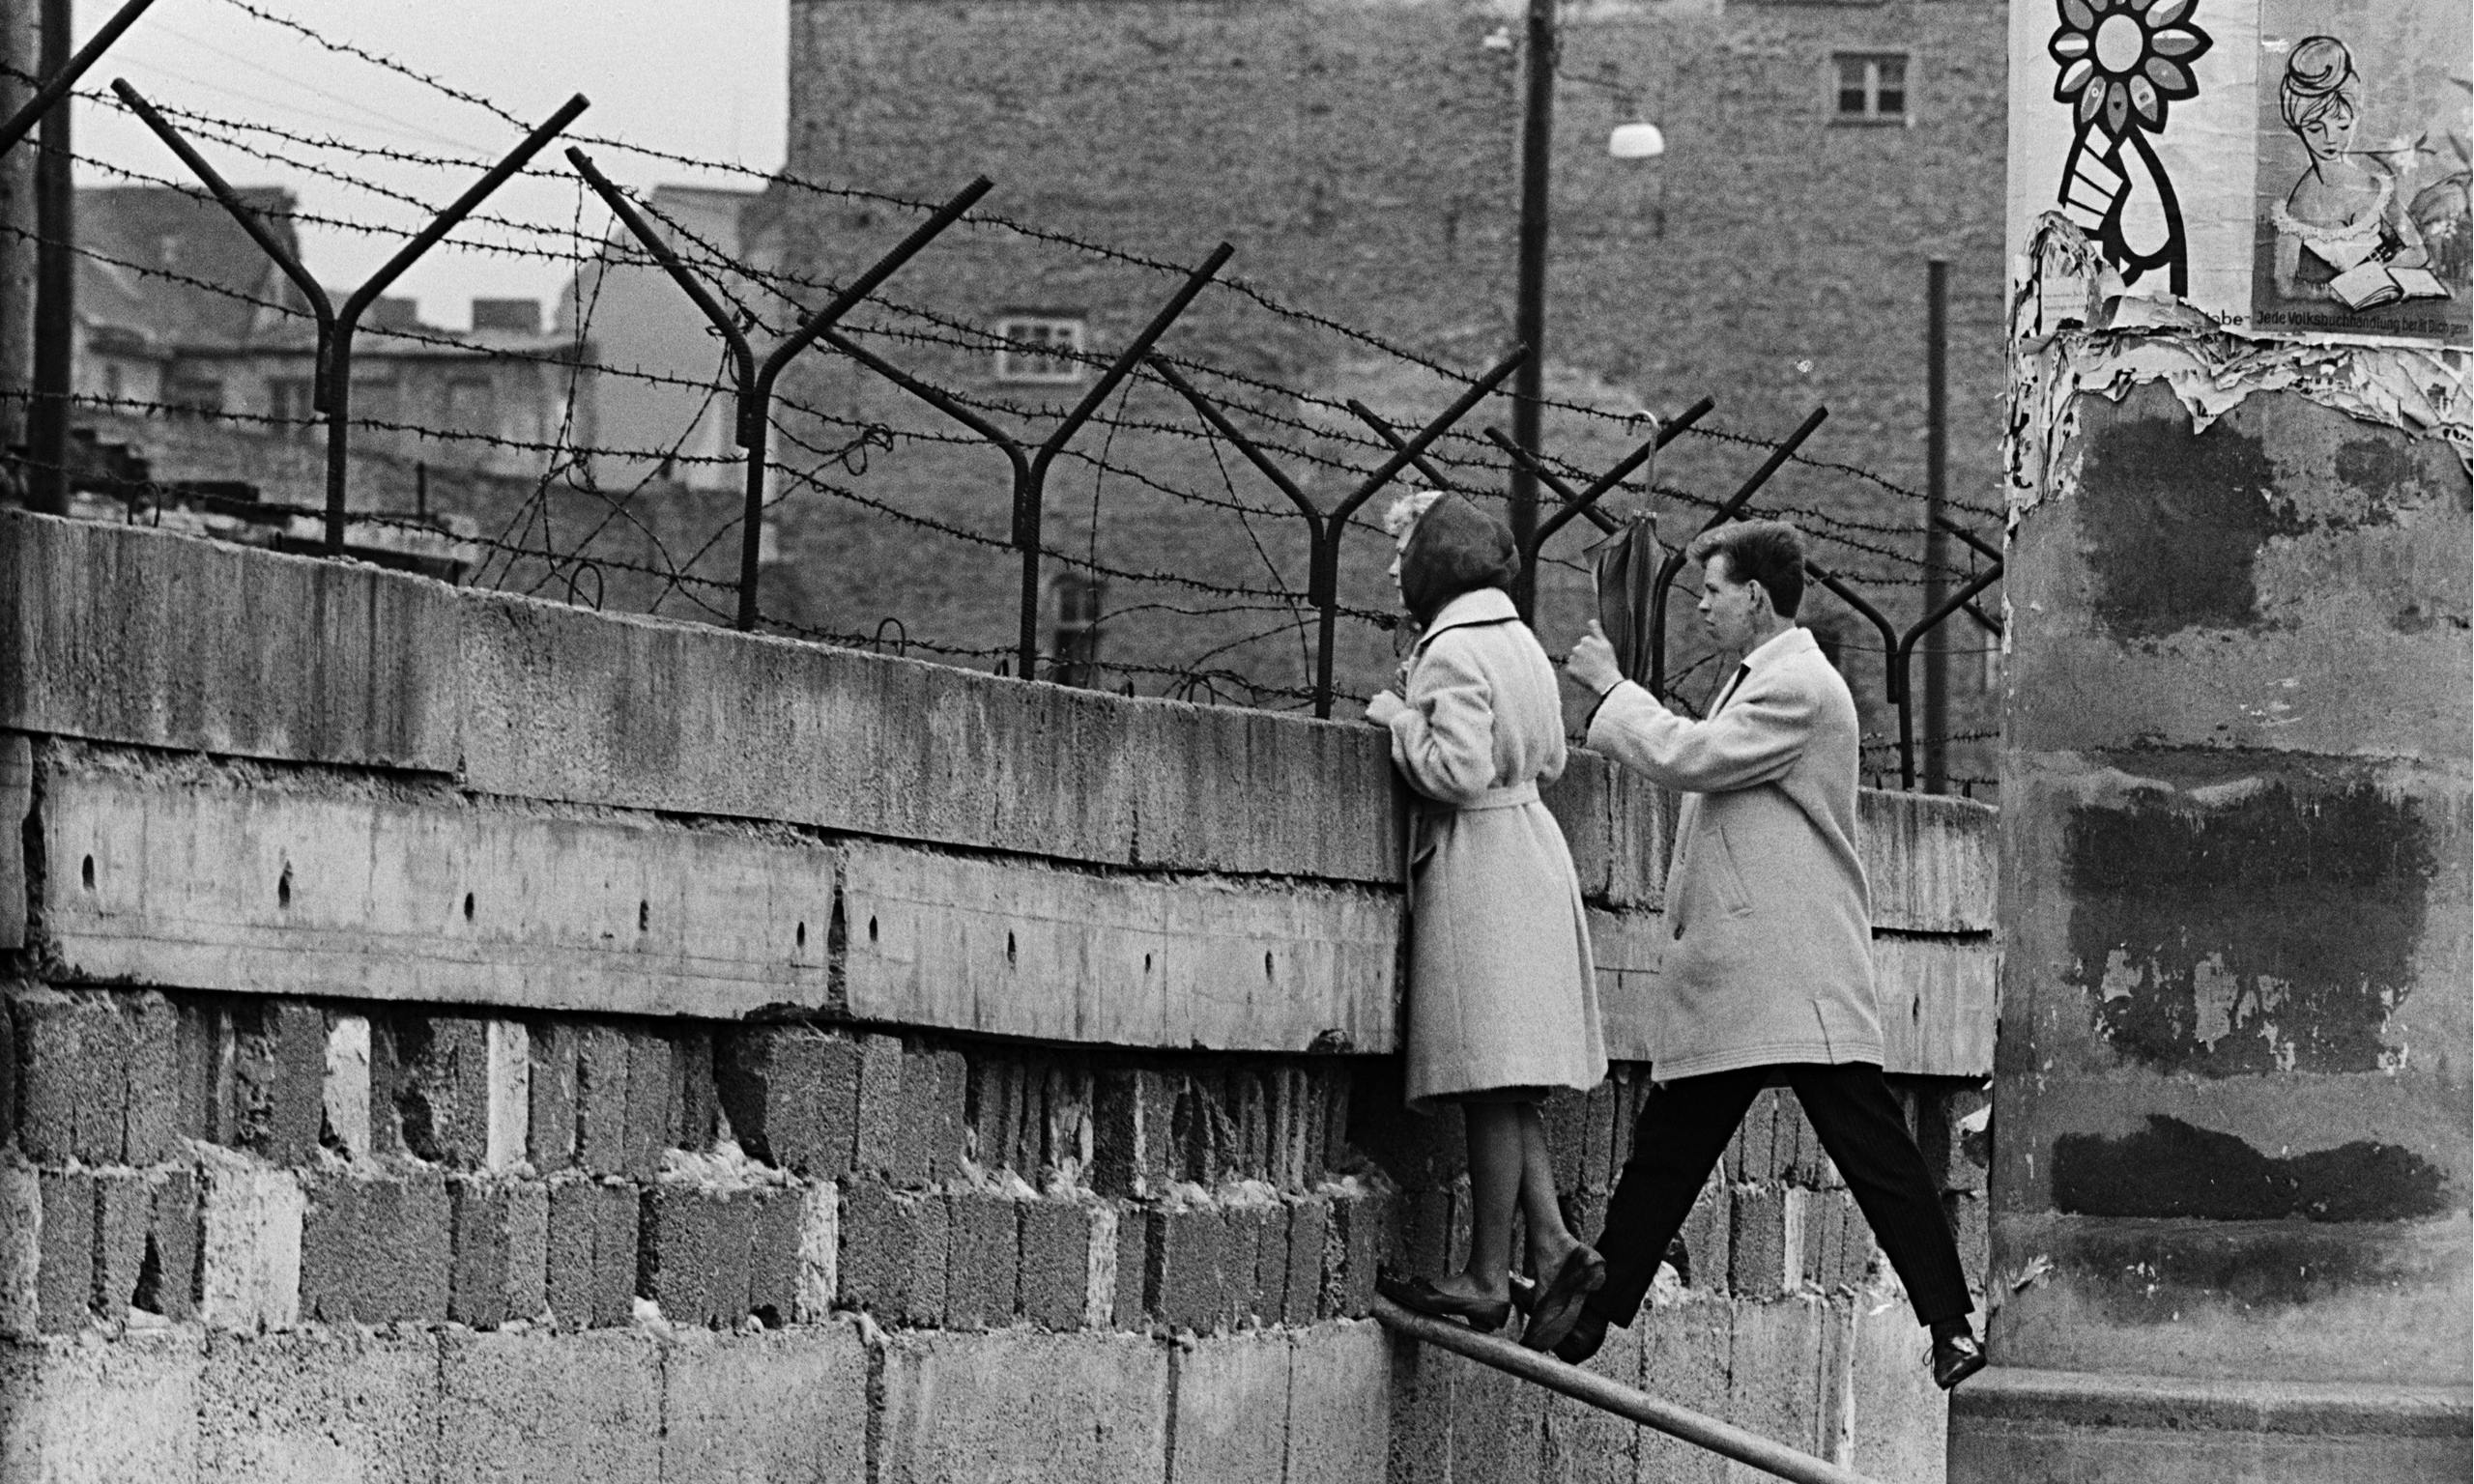 A young West Berlin couple peer over the Wall as the woman speaks to her mother in East Berlin, 1960s